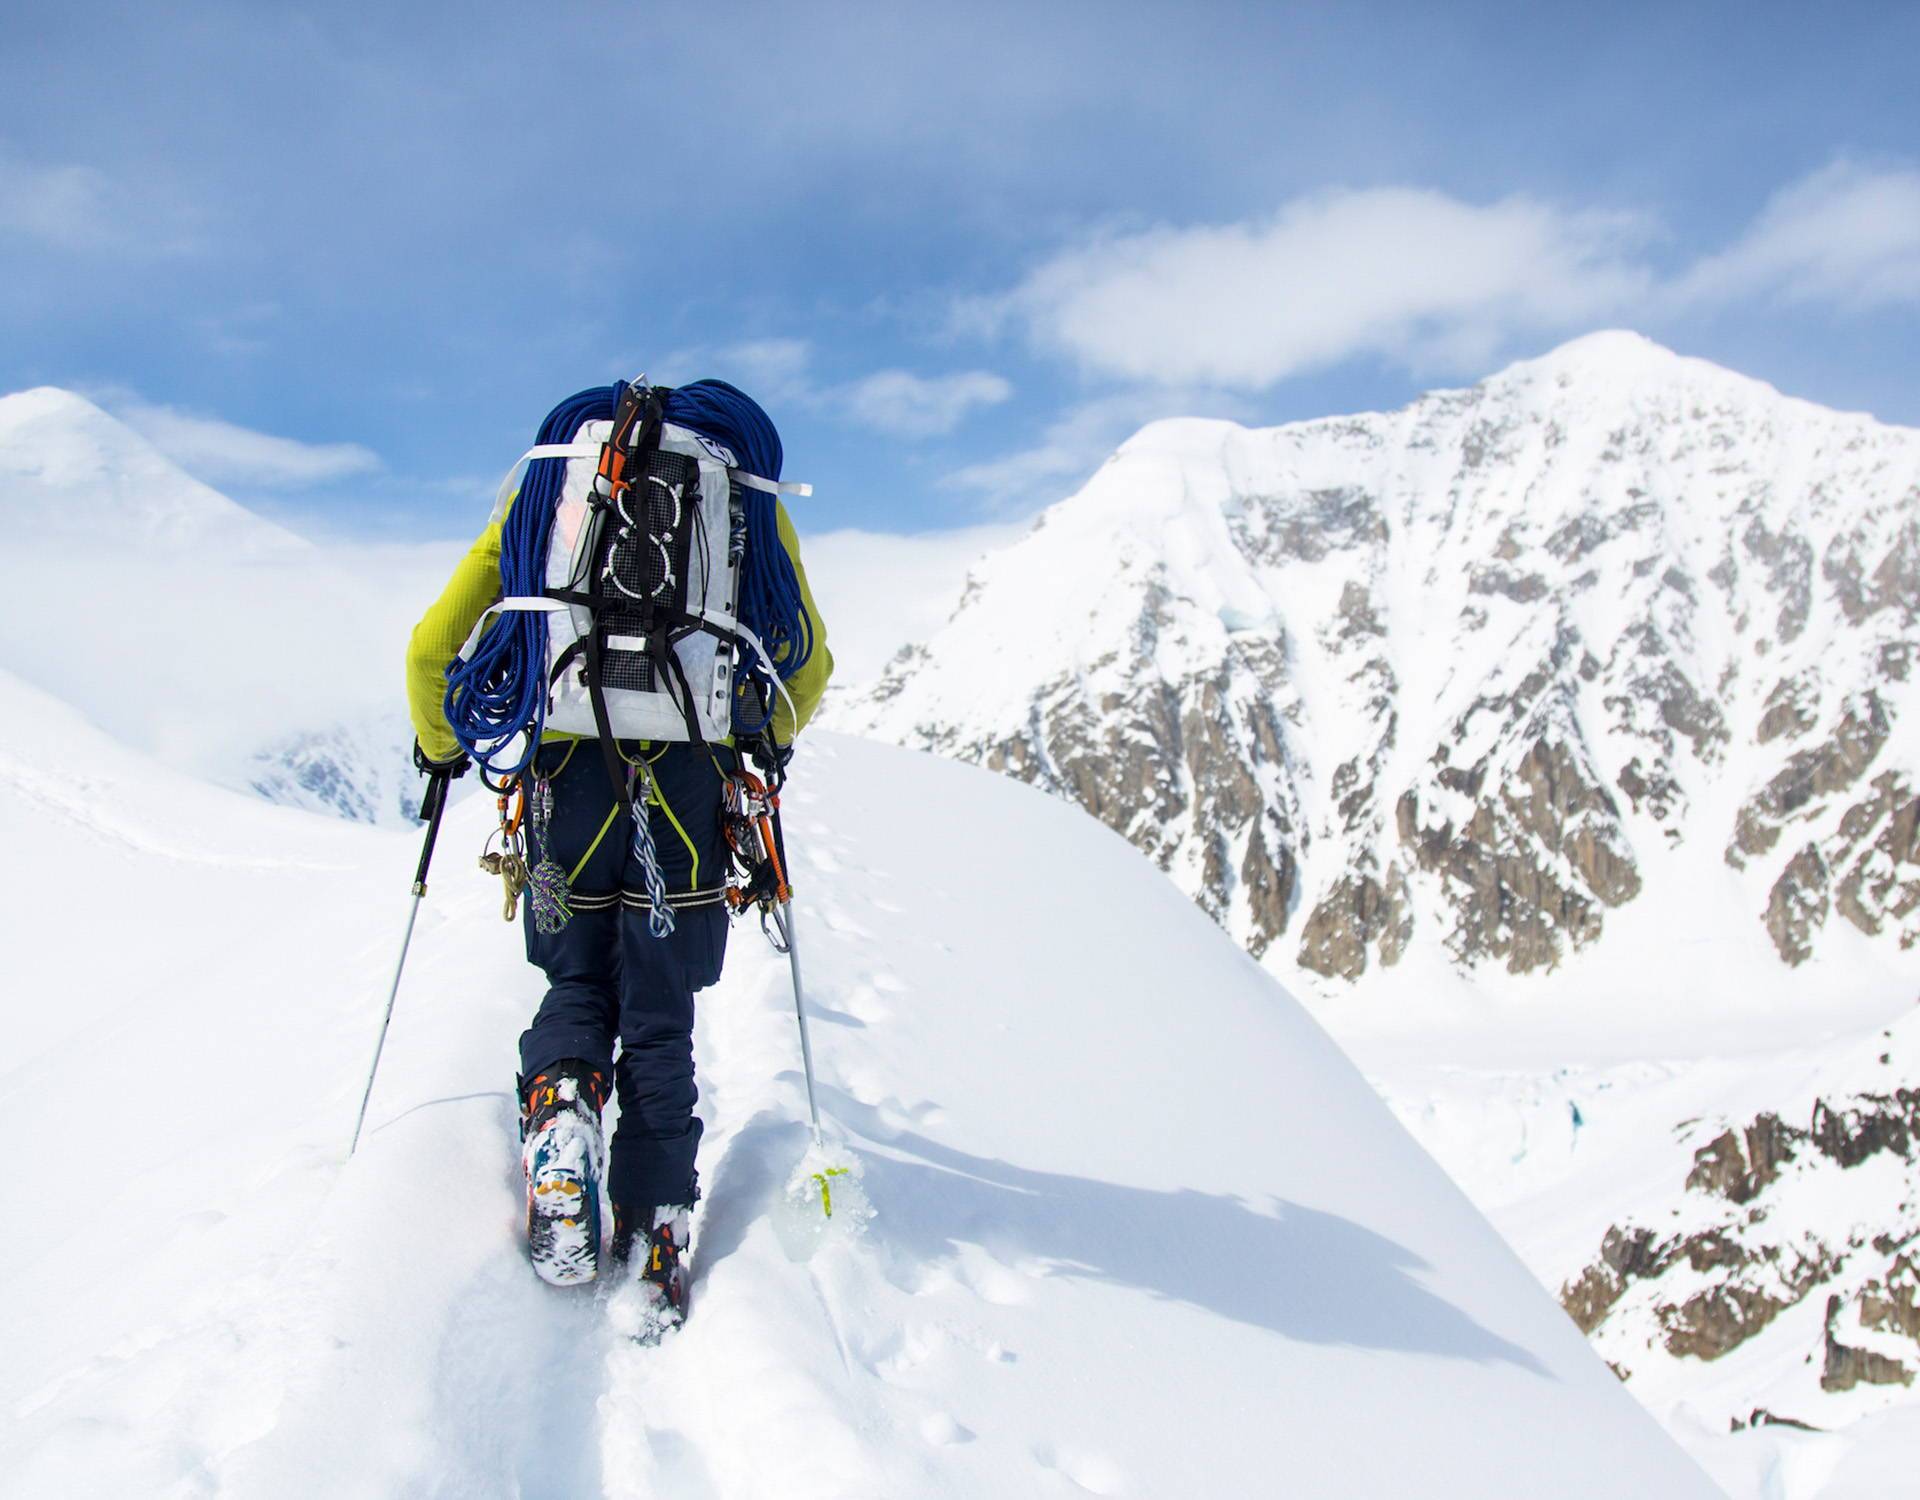 A man is hiking up a snowy mountain with skis on his back.